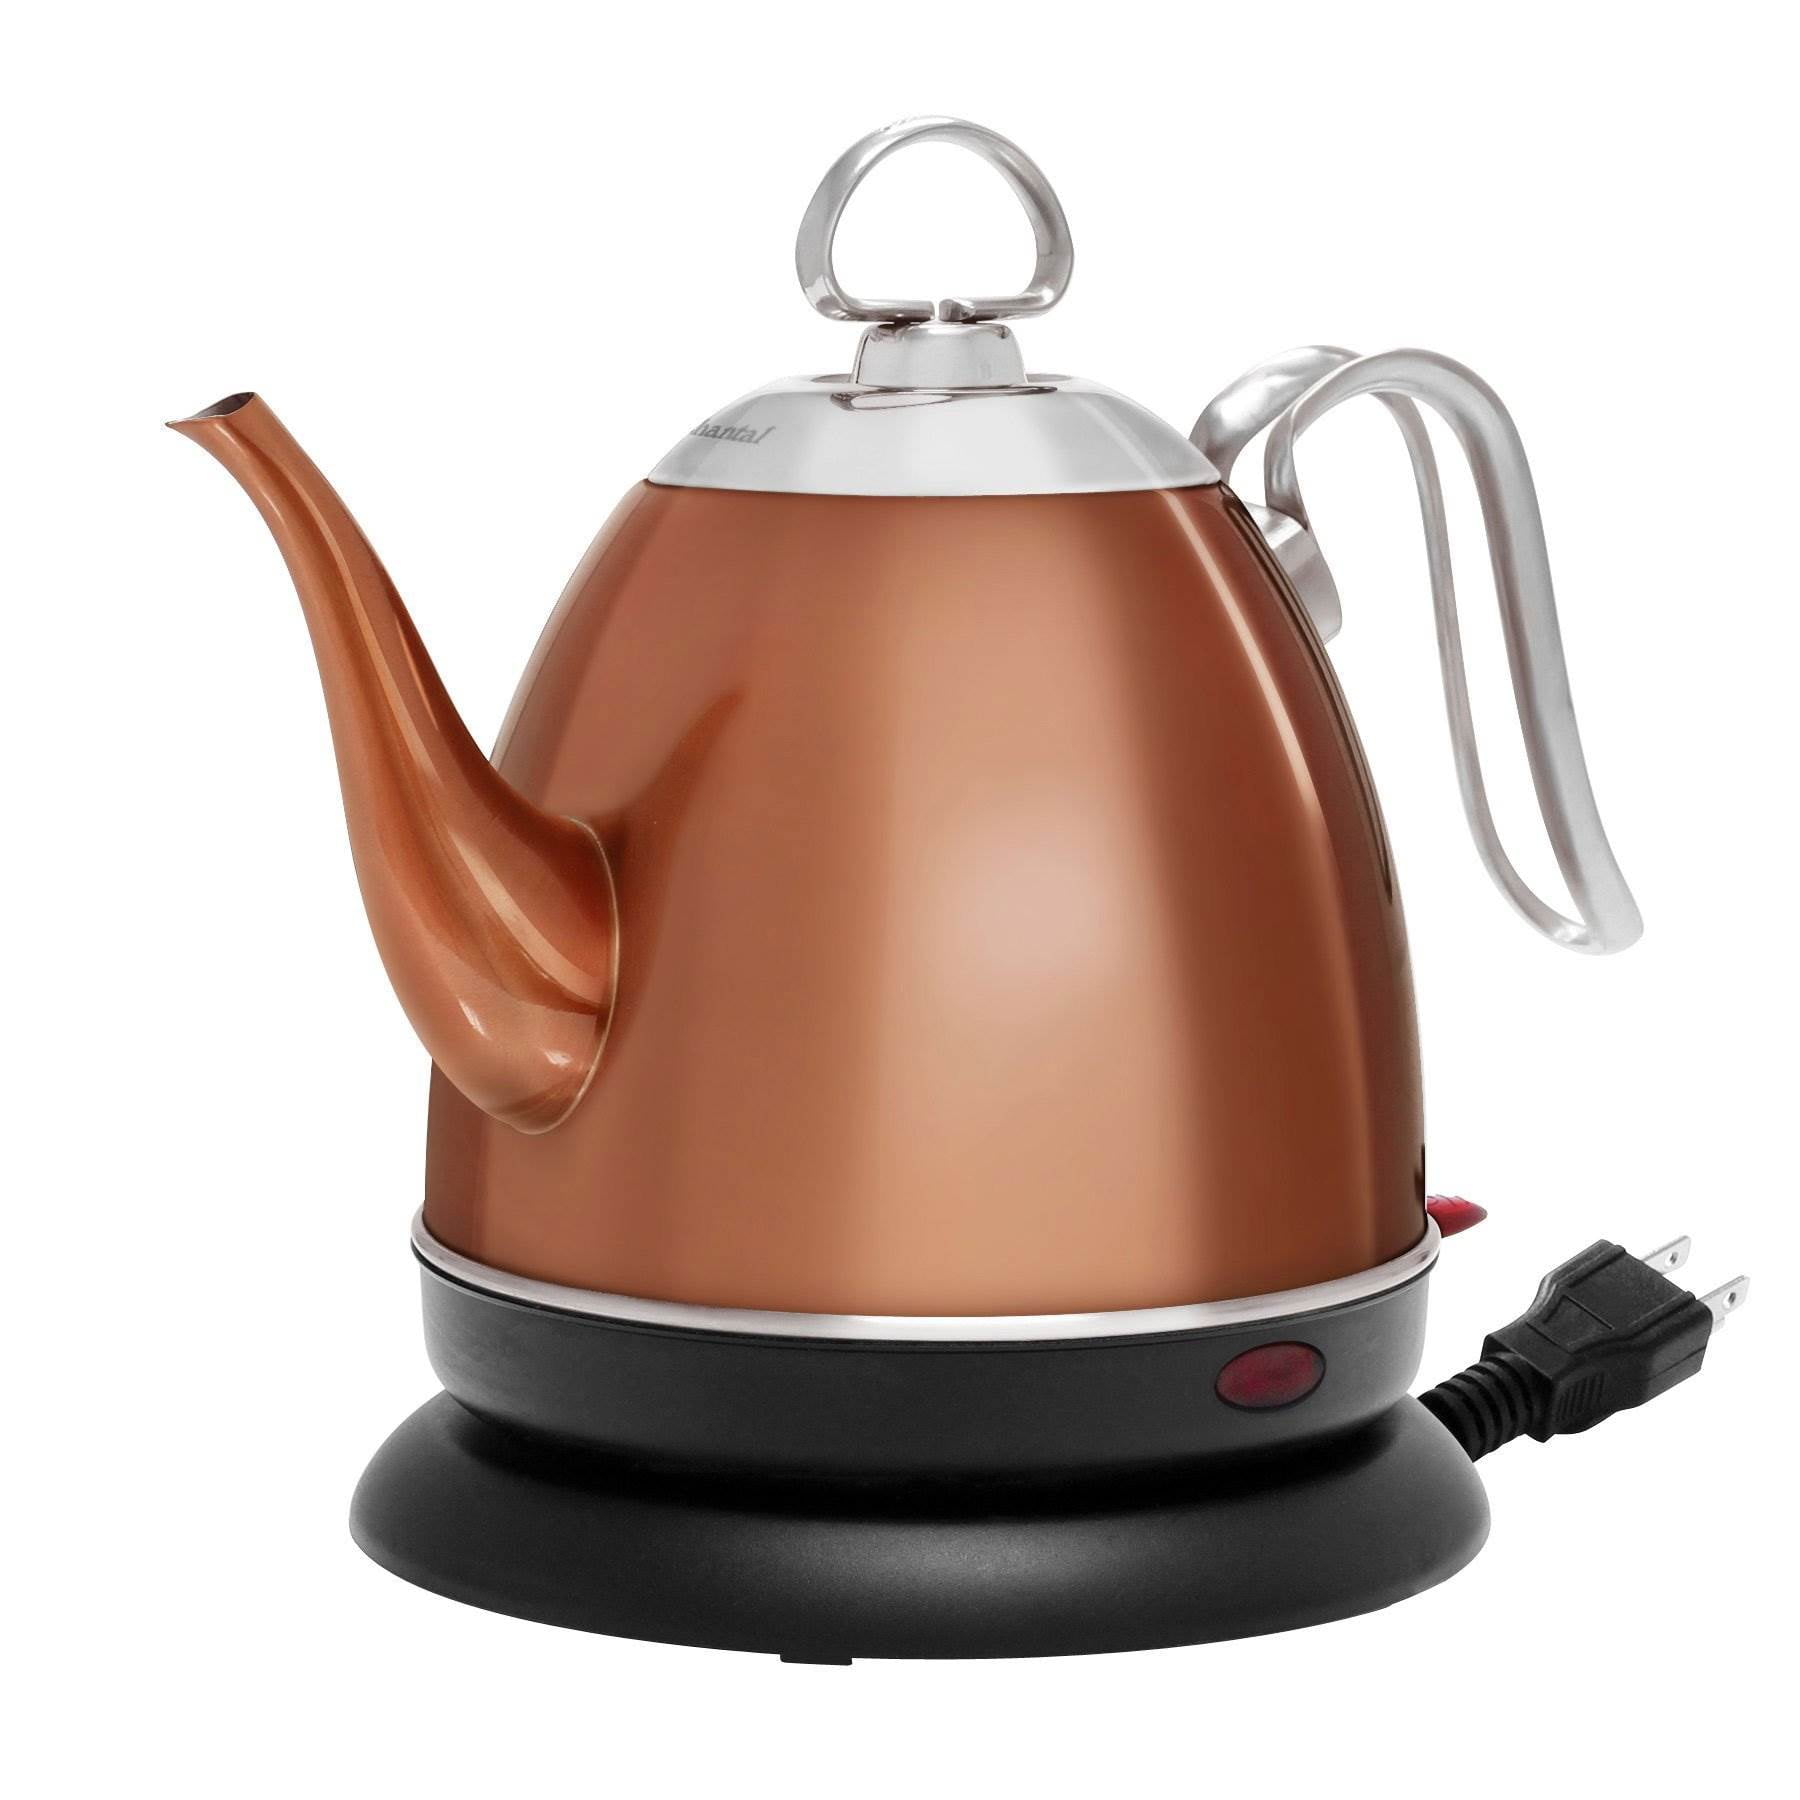 ROZKOP Electric Tea Kettle Double Wall 304 Stainless Steel 1.7L Hot Water  Boiler, 1500W Water Kettle with Auto Shut-Off & Boil Dry Protection